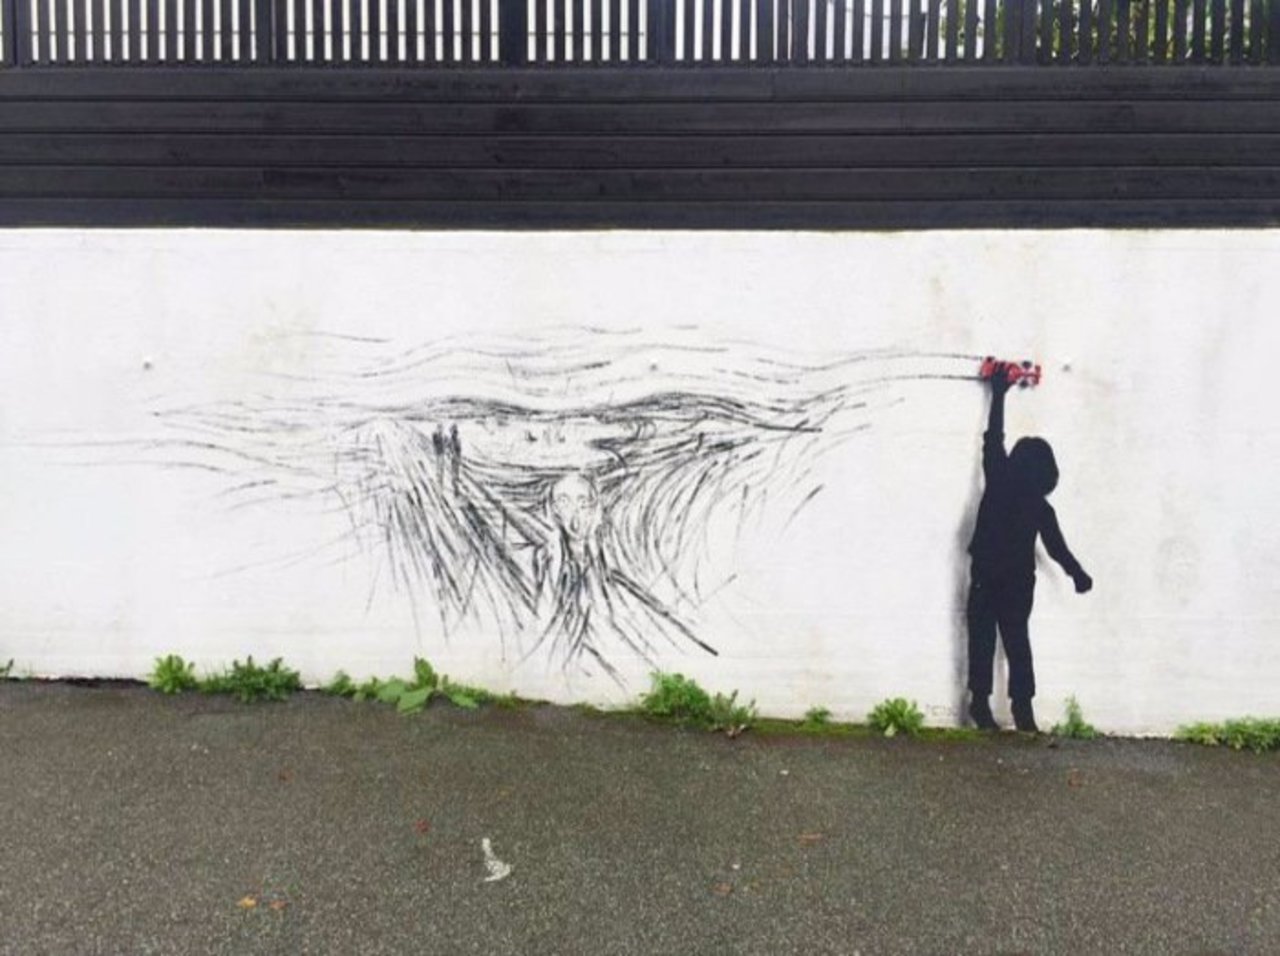 Playing is an #Art – #Creative #StreetArt by @Pejac_art | Be ▲rtist - Be ▲rt https://beartistbeart.com/2016/09/12/playing-is-an-art-creative-streetart-by-pejac_art/?utm_campaign=crowdfire&utm_content=crowdfire&utm_medium=social&utm_source=twitter https://t.co/T85ytqYWgD